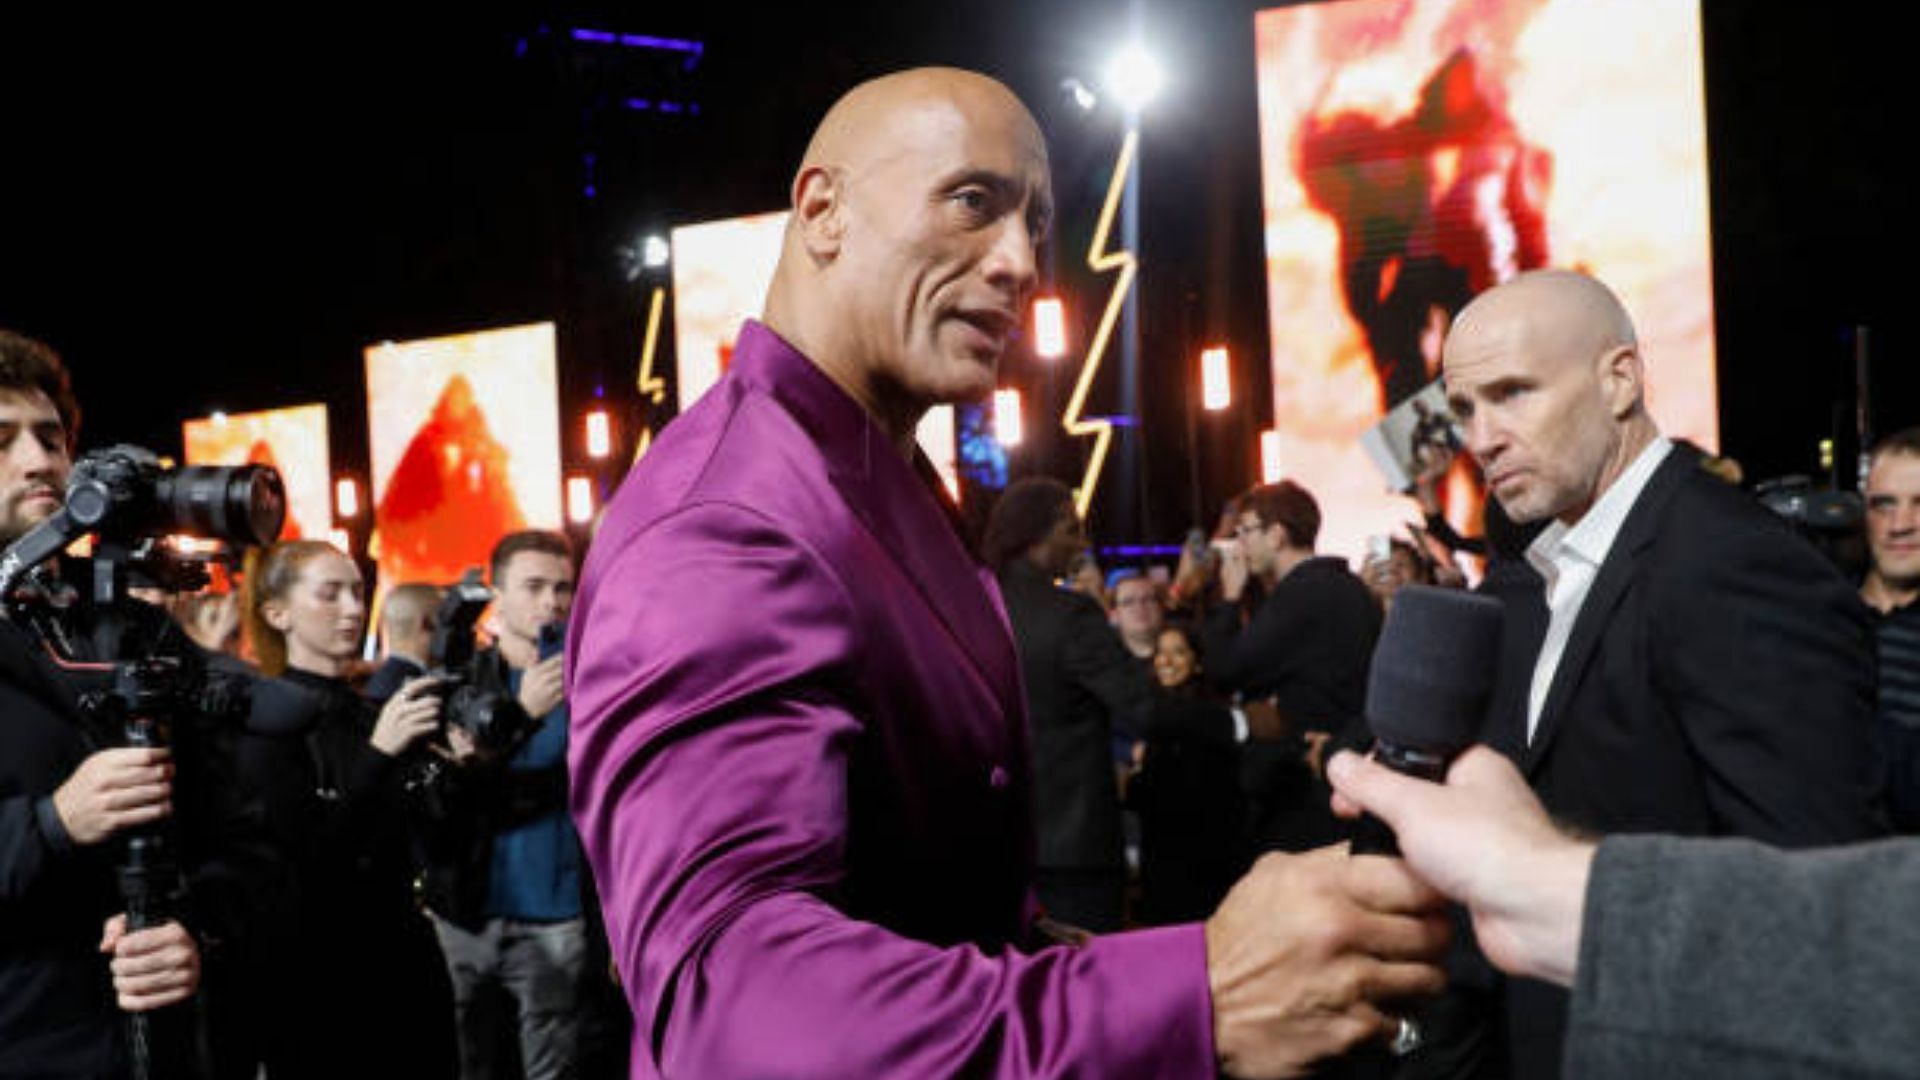 The Rock teased a match with Roman Reigns upon WWE return!